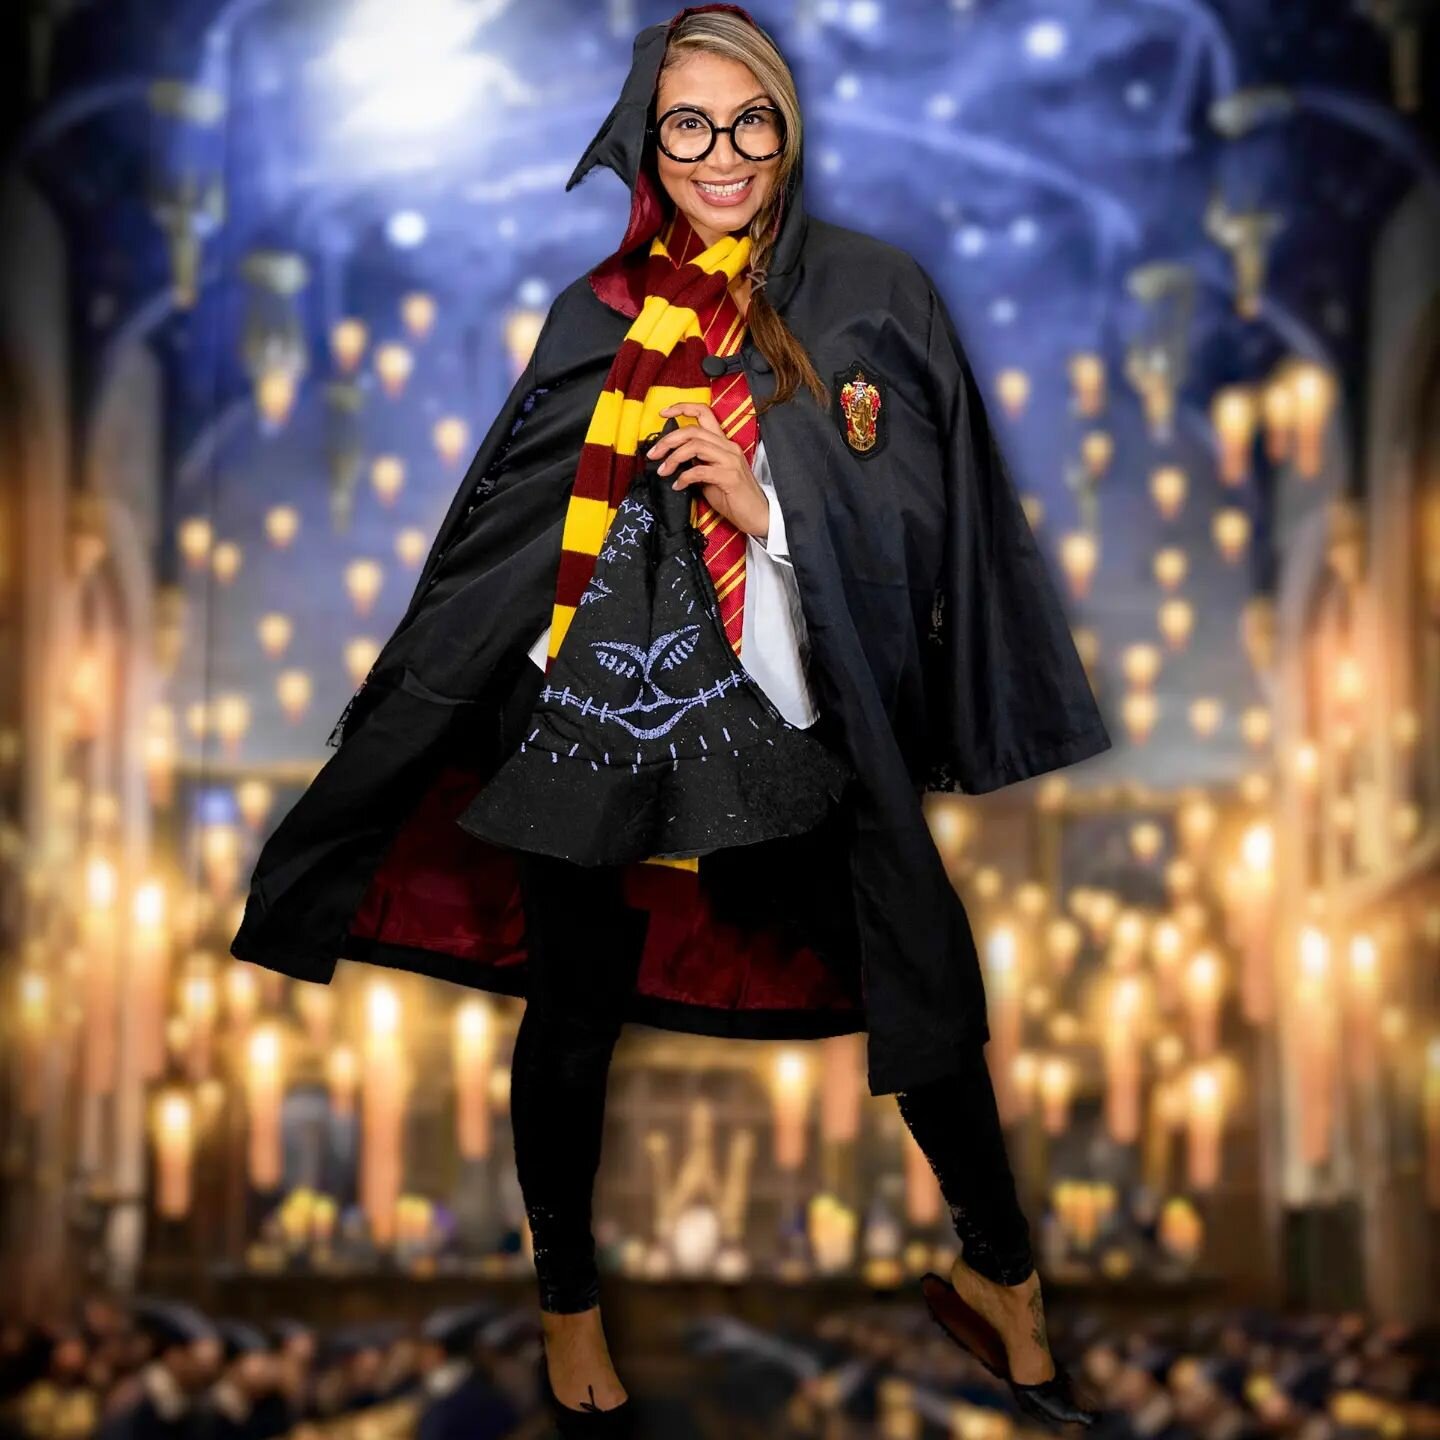 HARRY POTTER 💙💚💜
.
Hogwarts themed parties are very popular amongst older children and they are so much fun! 
.
Just like in the films, our pupils are divided into their houses using the Sorting Hat. 
.
The houses compete against eachother in a va